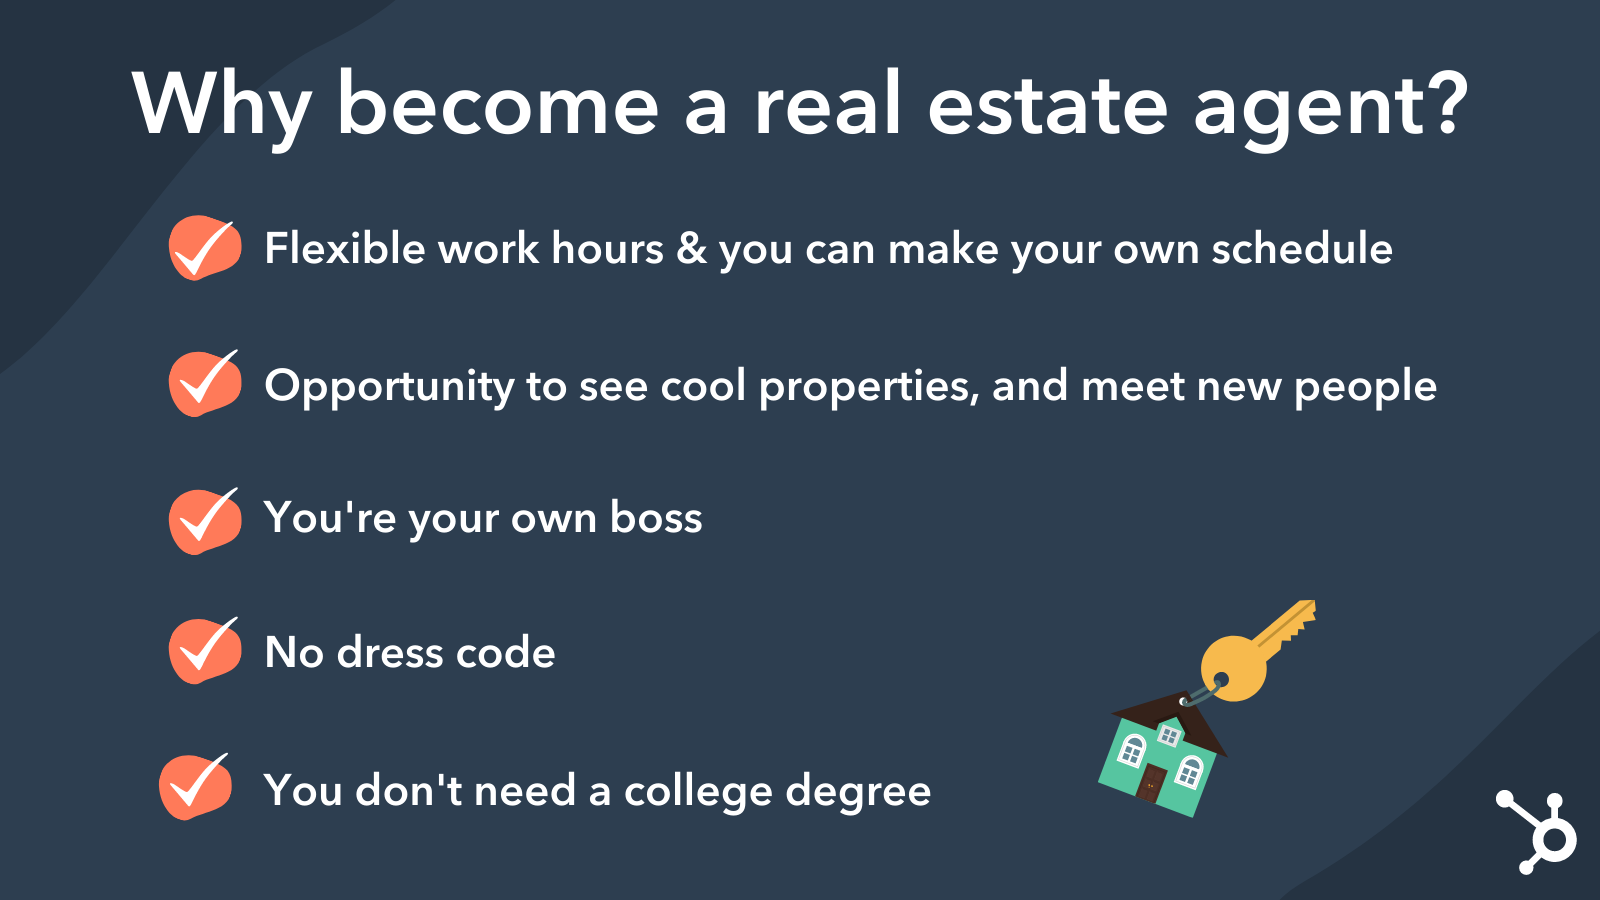 How to a Real Estate Agent, According to Experts